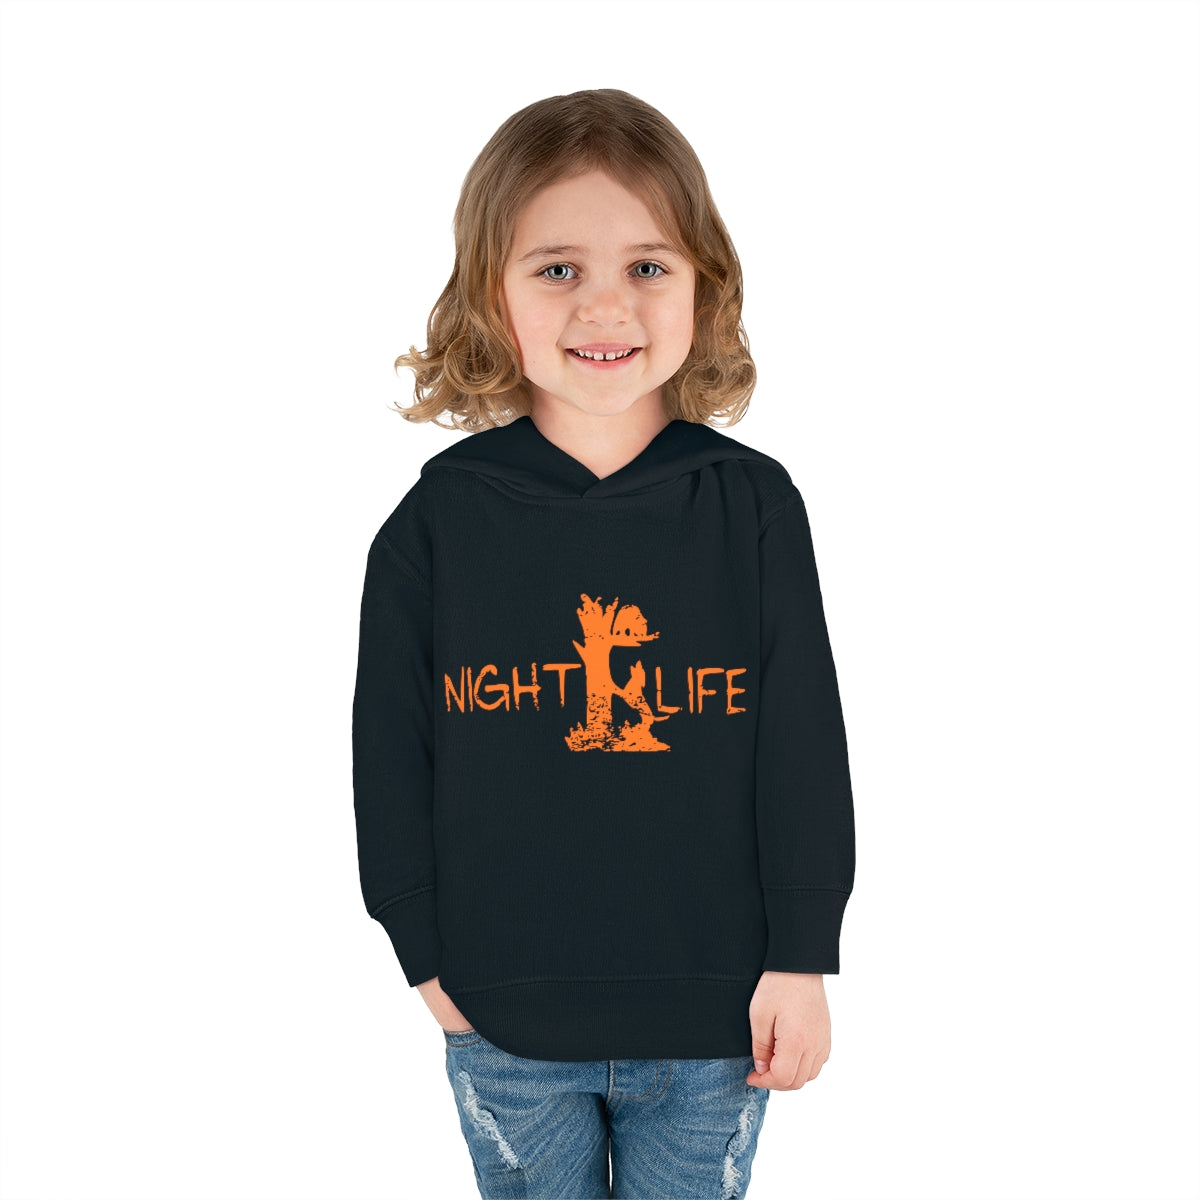 Treed Coon Night Life Toddler Pullover Fleece Hoodie